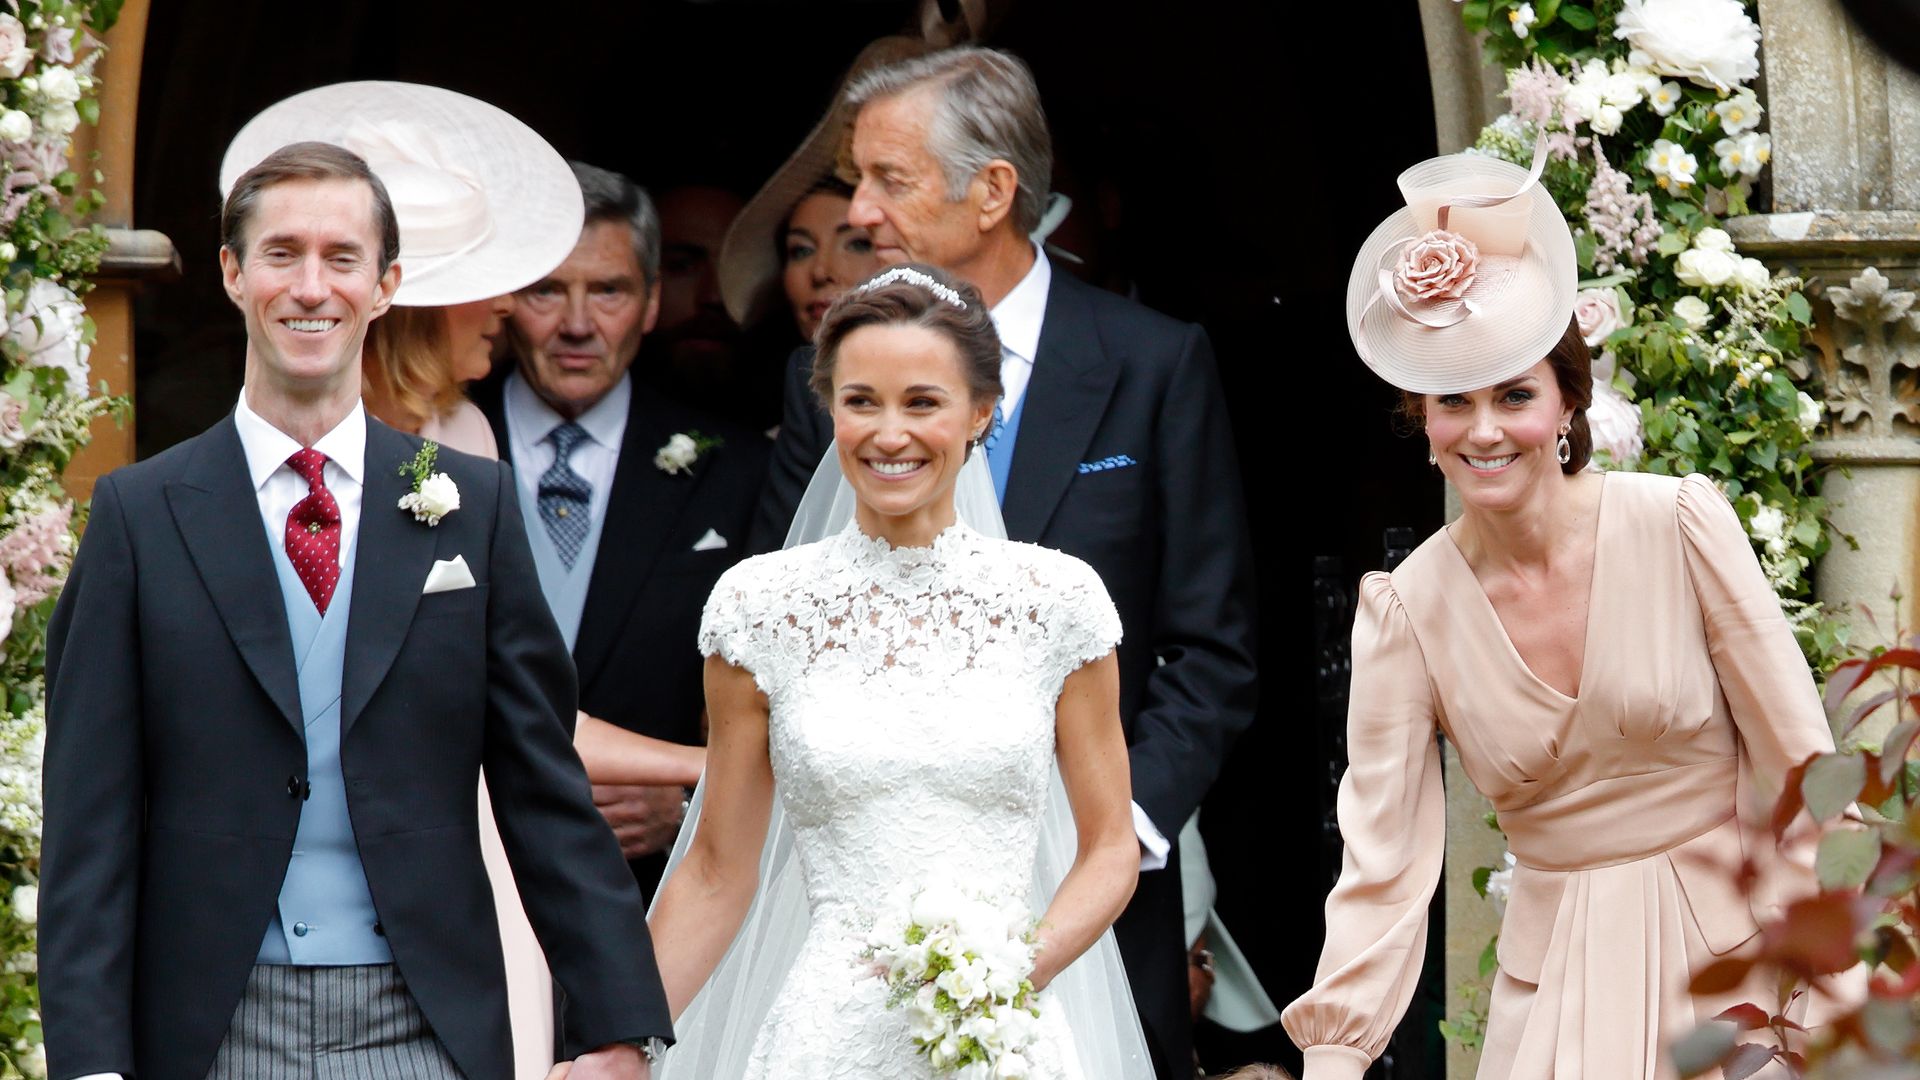 Kate was Pippa's maid of honour